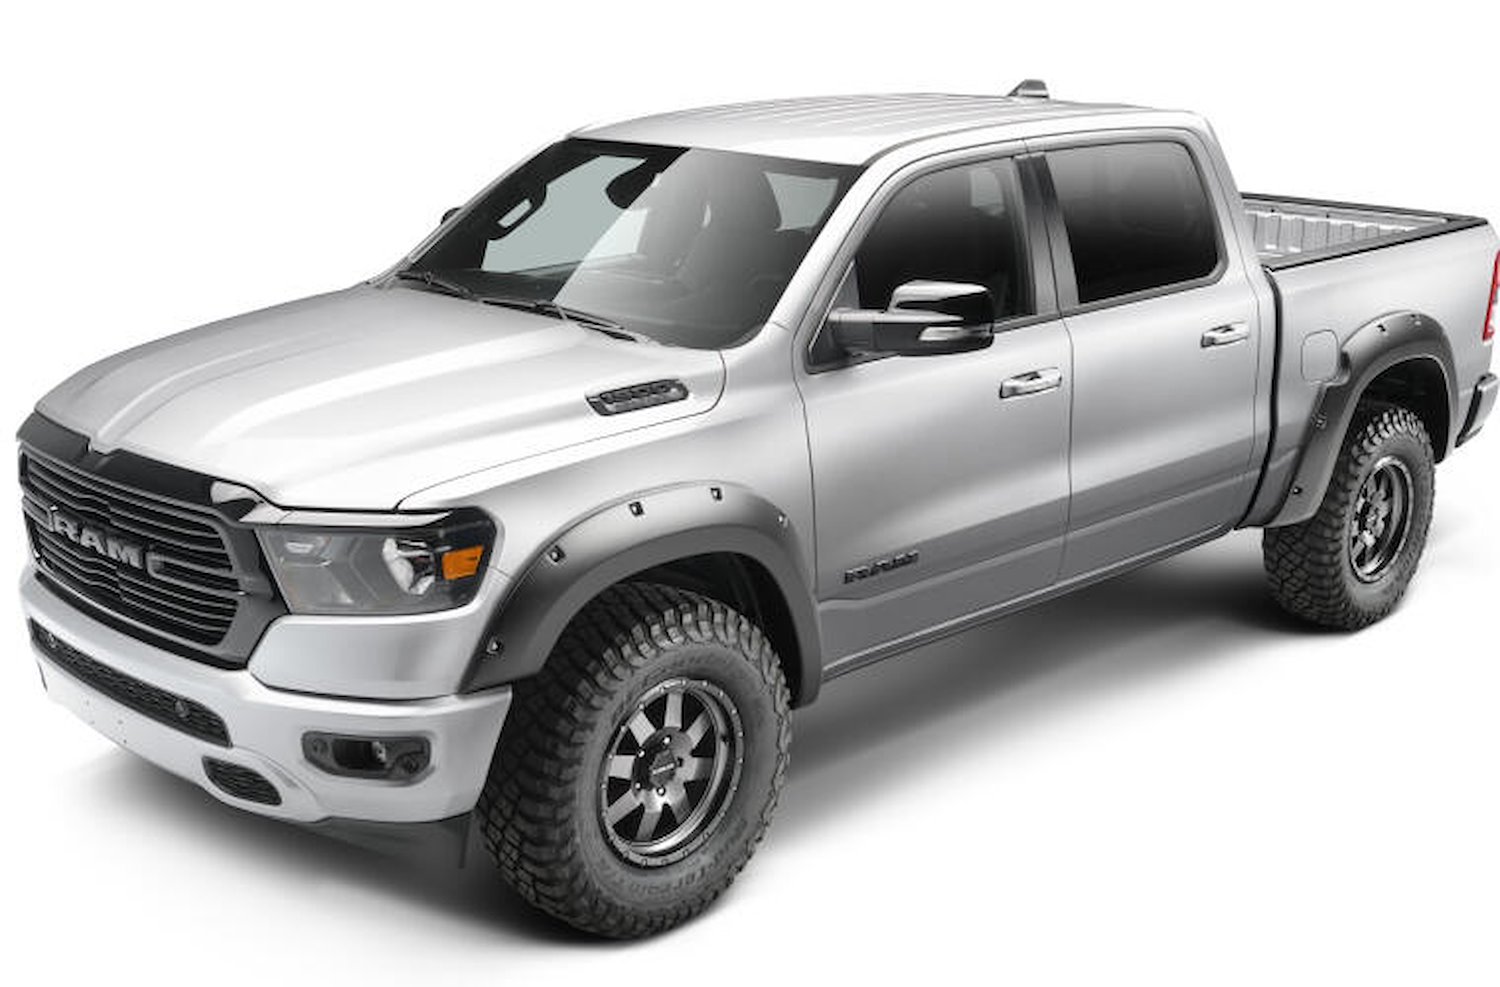 Forge Front/Rear Fender Flares for Late-Model Ram 1500